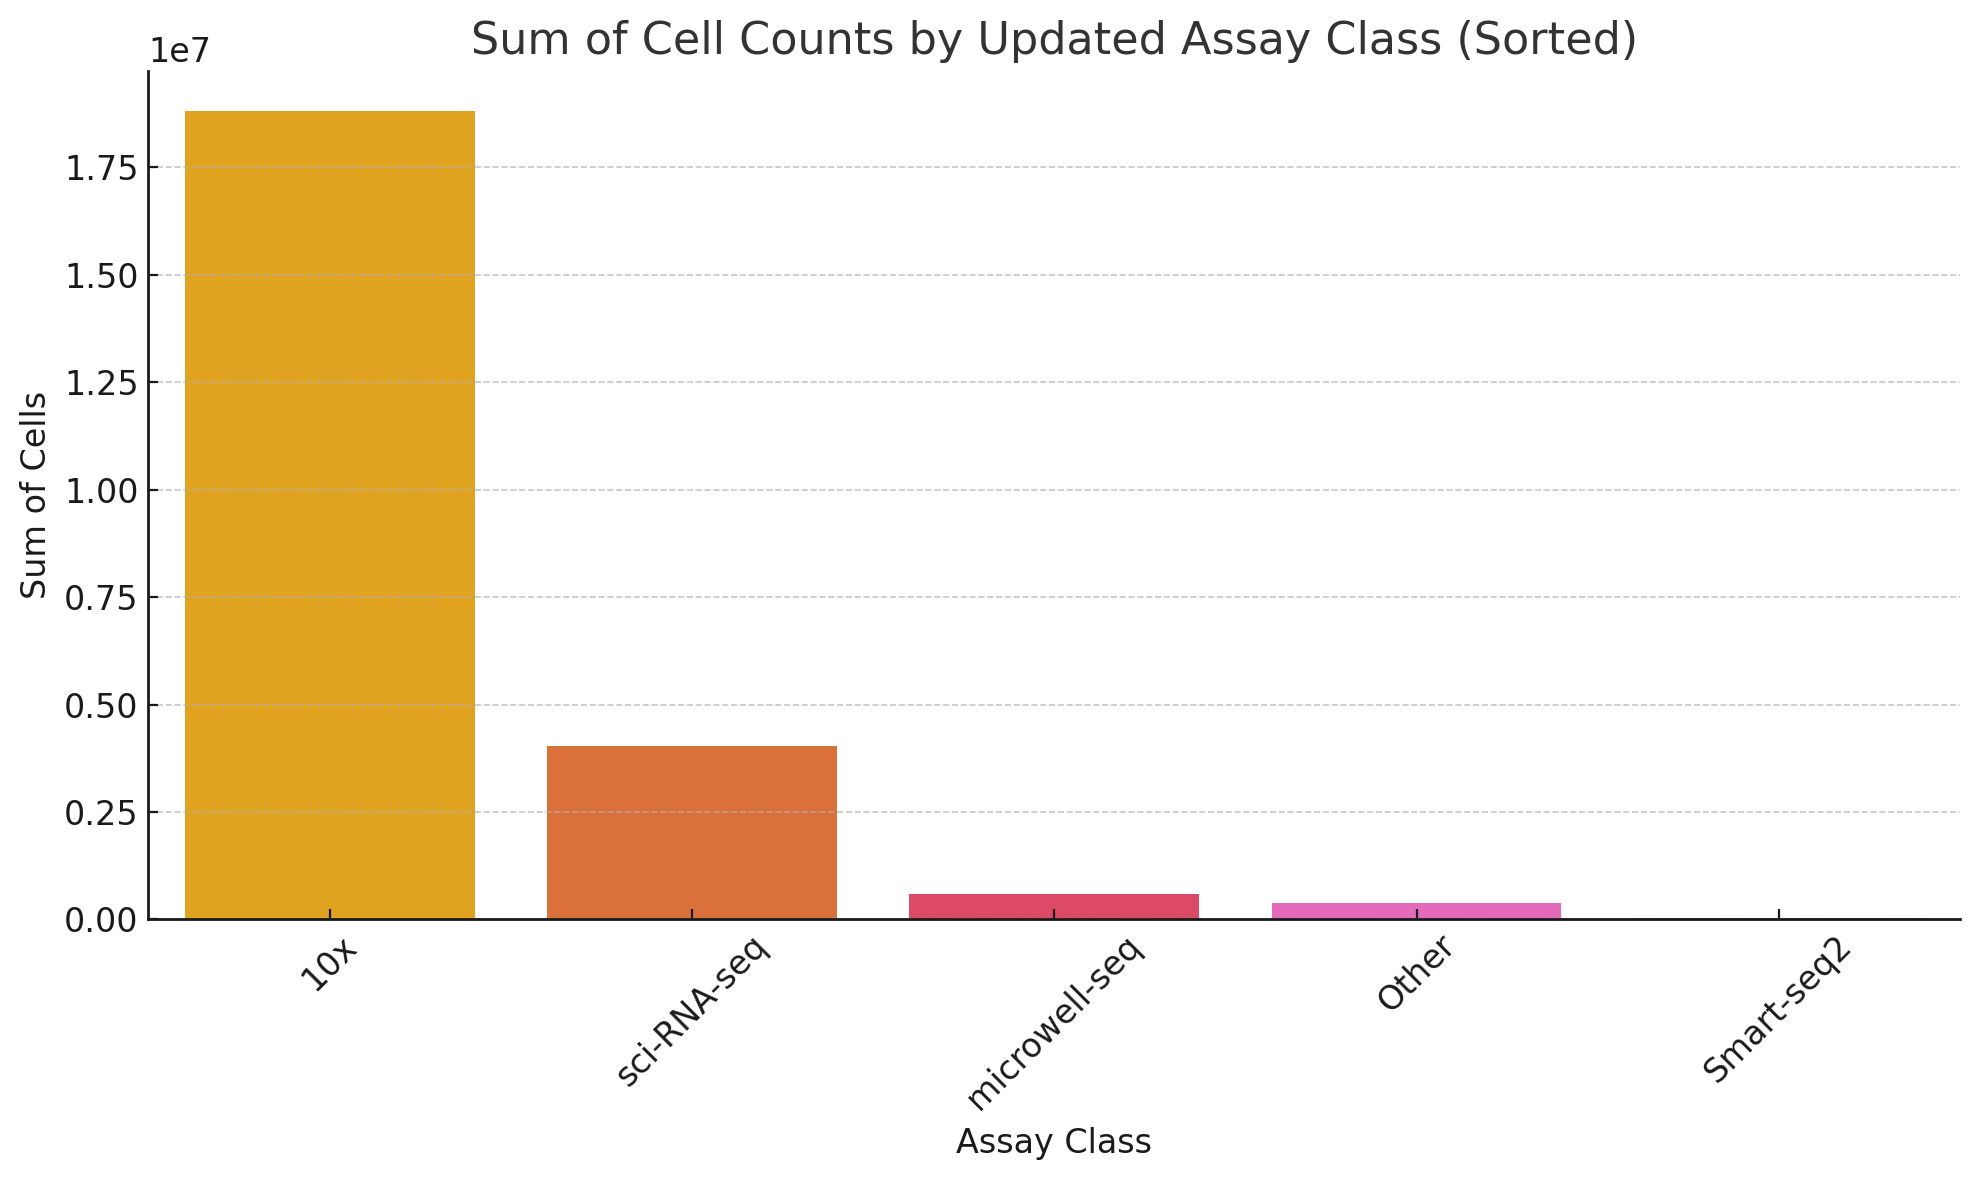 Number of cells by assay